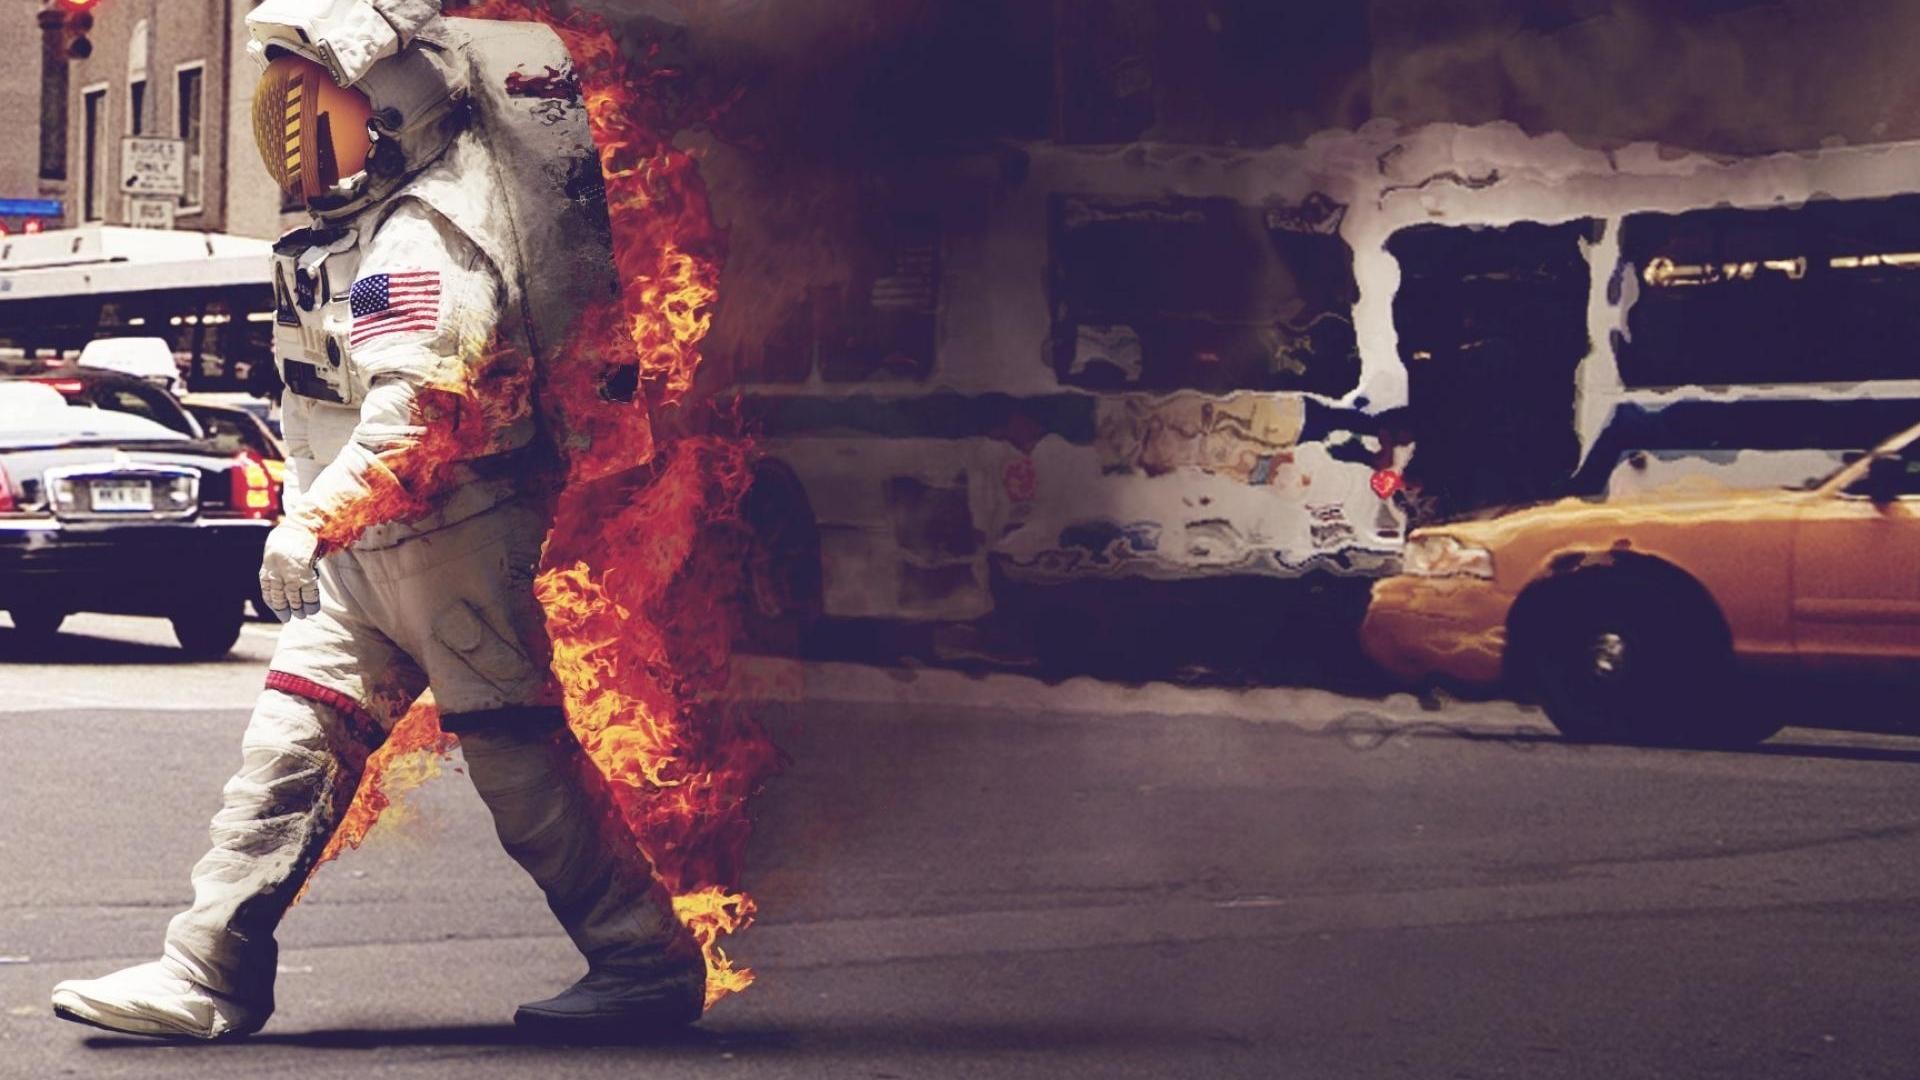 1920x1080 Astronaut On Fire Crossing The Road HD Rare Wallpaper Free HD .